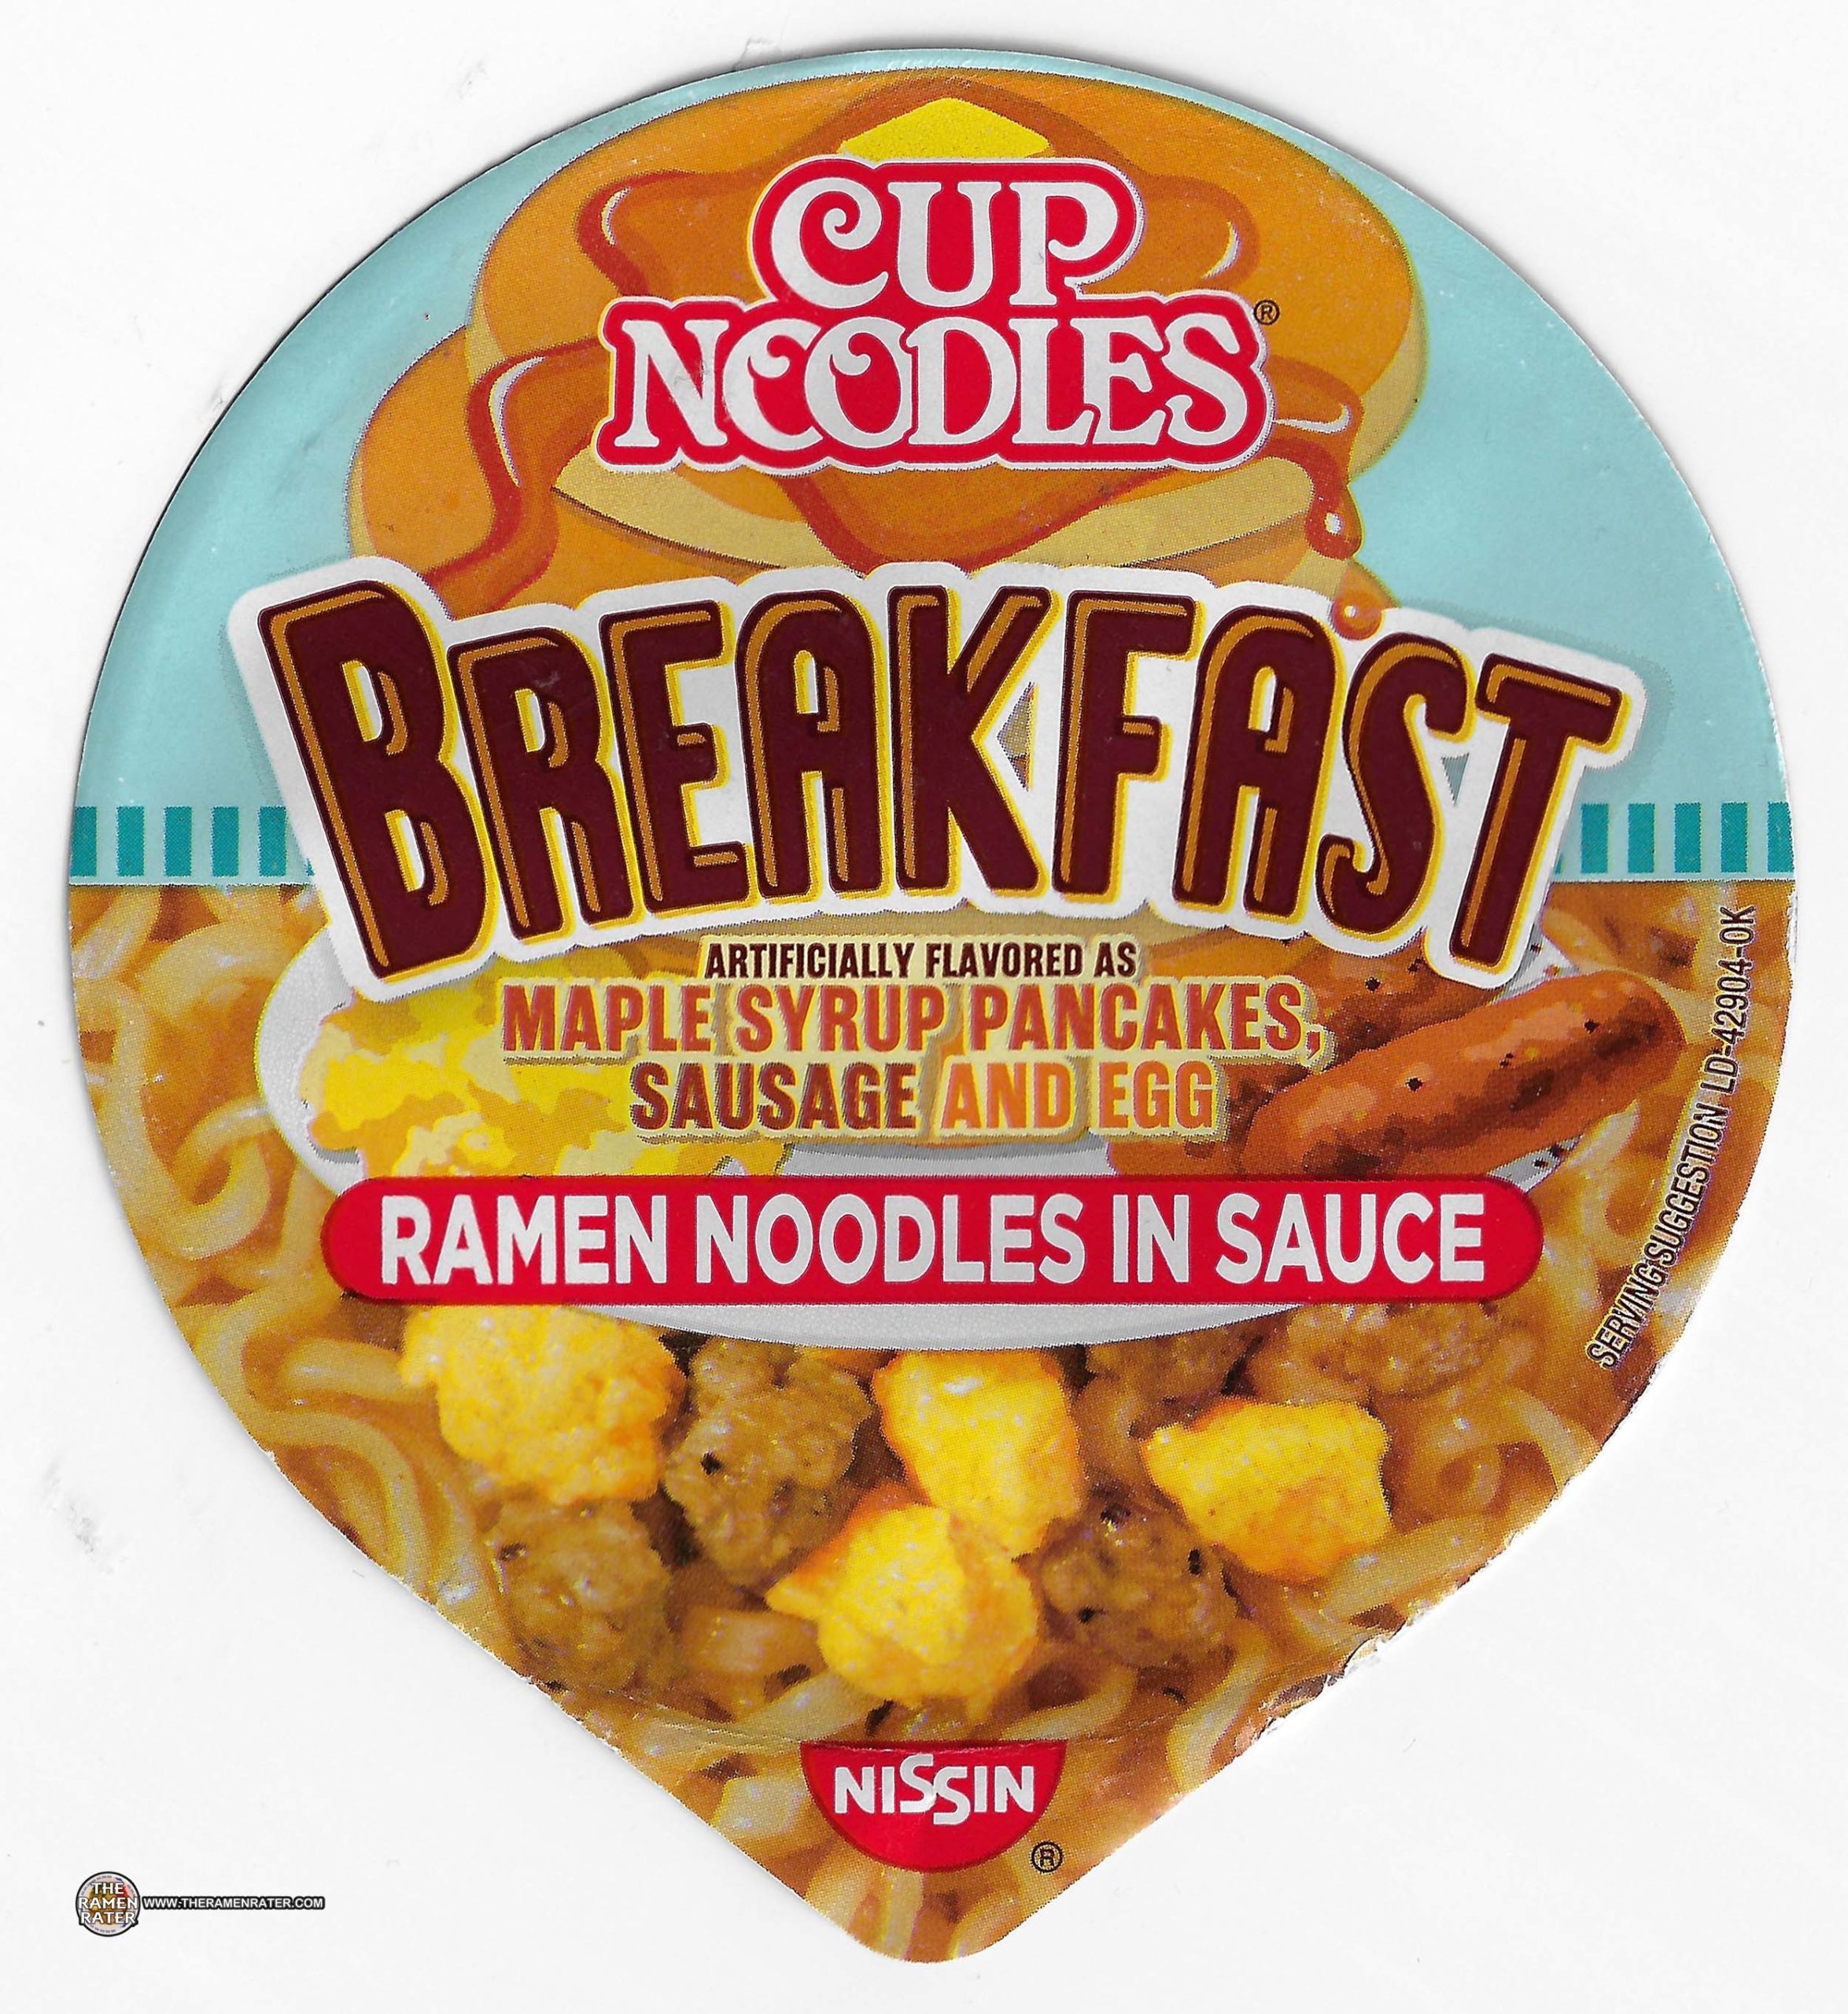 I Tried Cup Noodle's Limited-Edition Breakfast Flavor — Here's What I Think